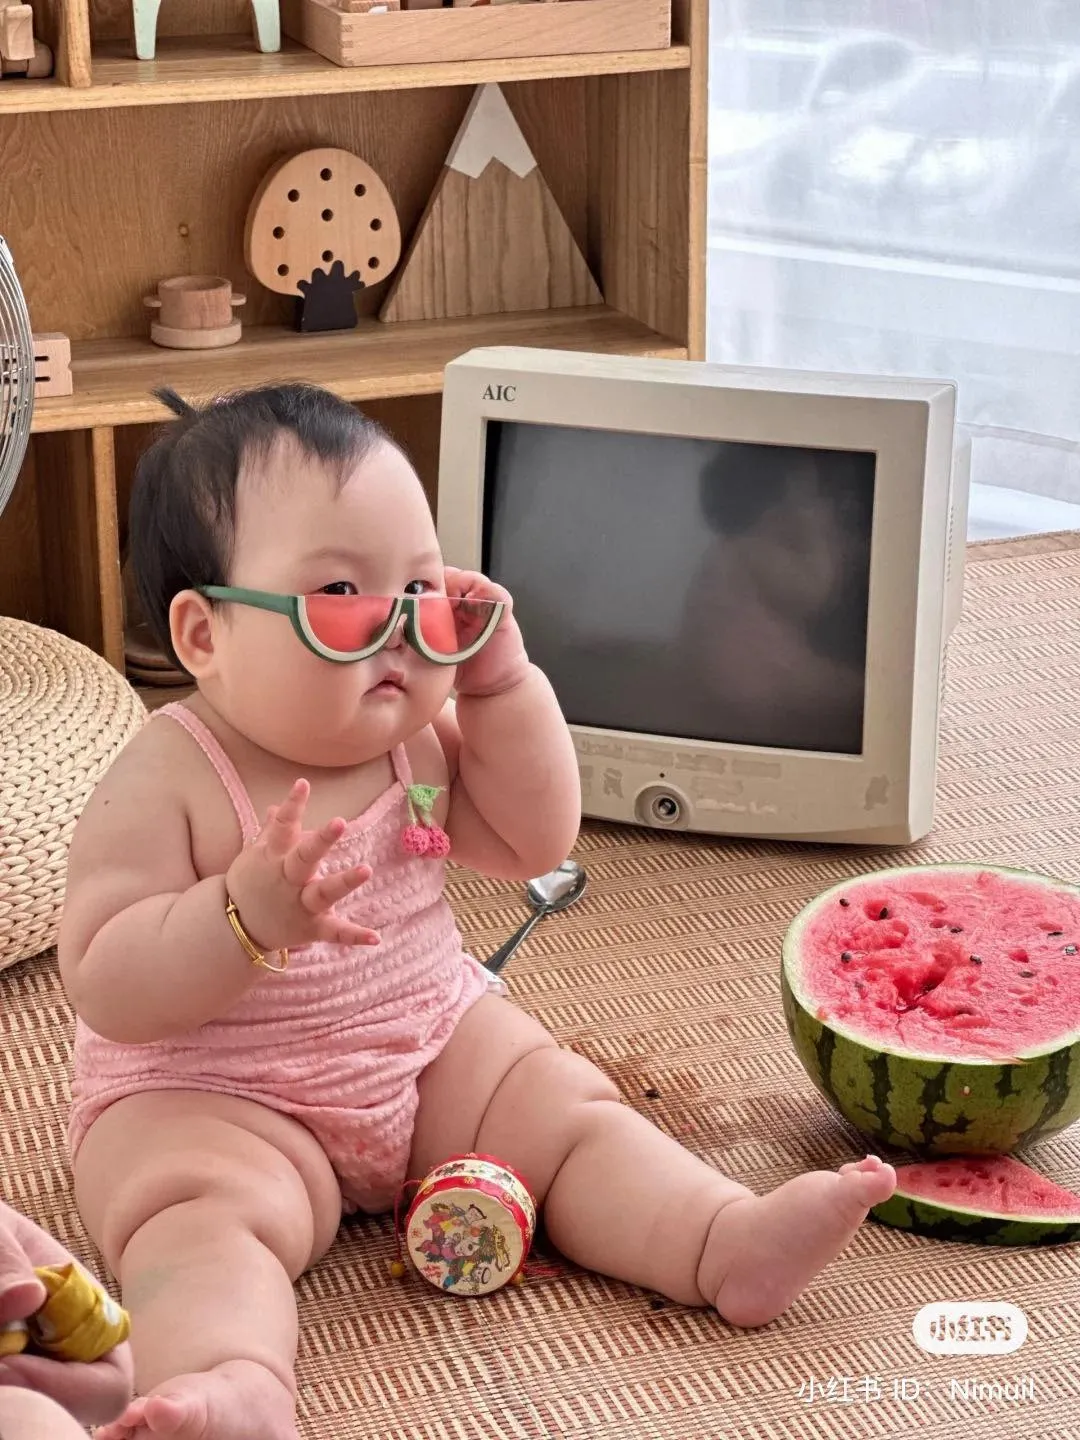 1 A Baby Eating Watermelon Makes Netizens Delighted